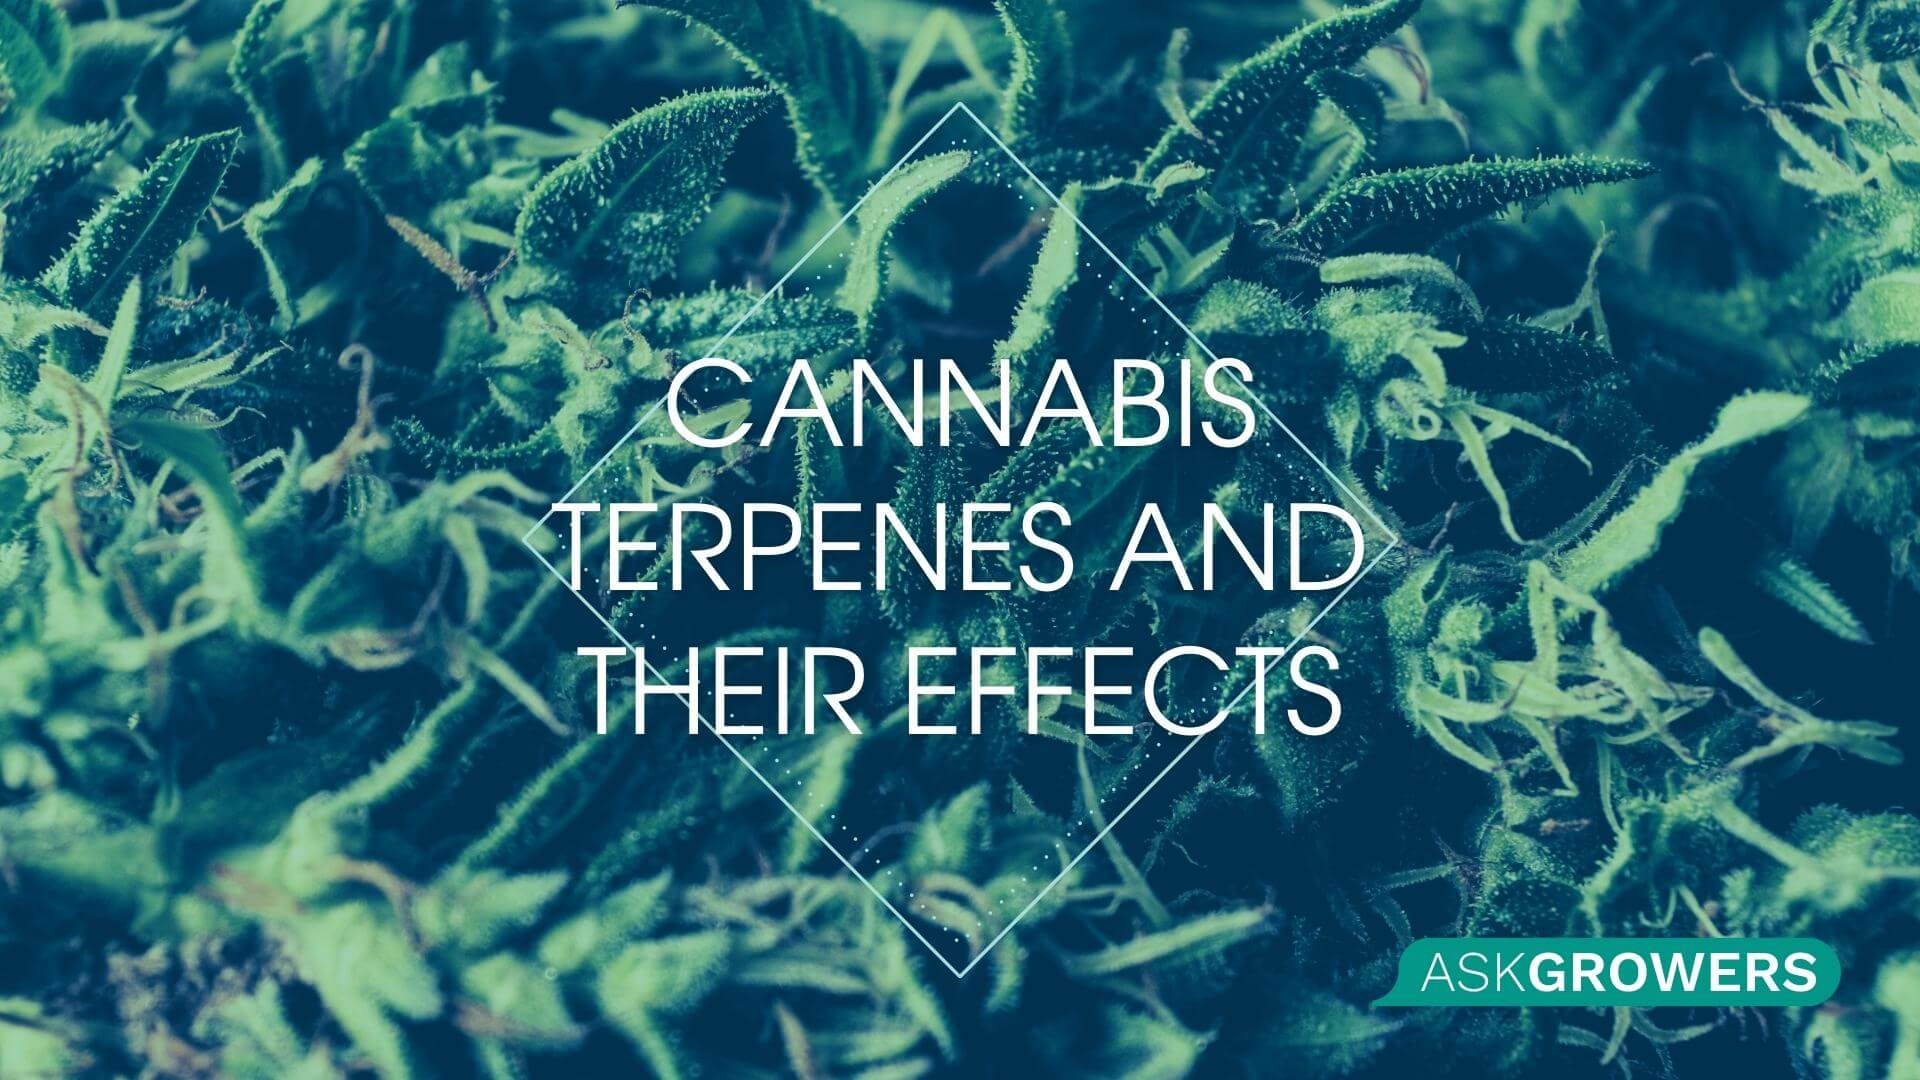 Terpenology 101, Part 2: Cannabis Terpenes and Their Effects